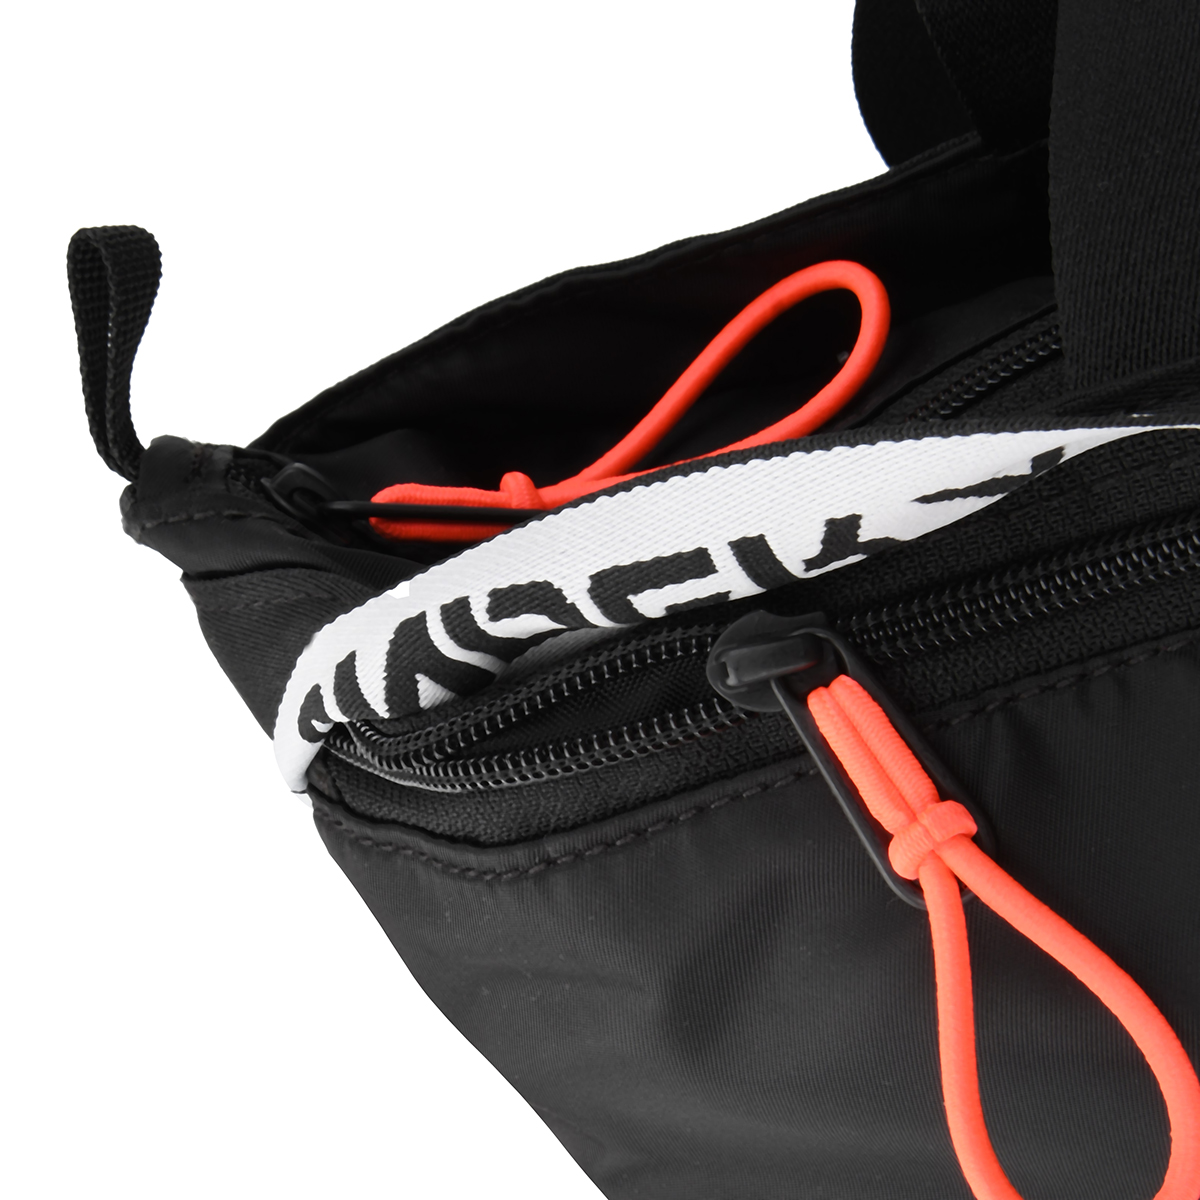 Bolso Under Armour Essentials,  image number null